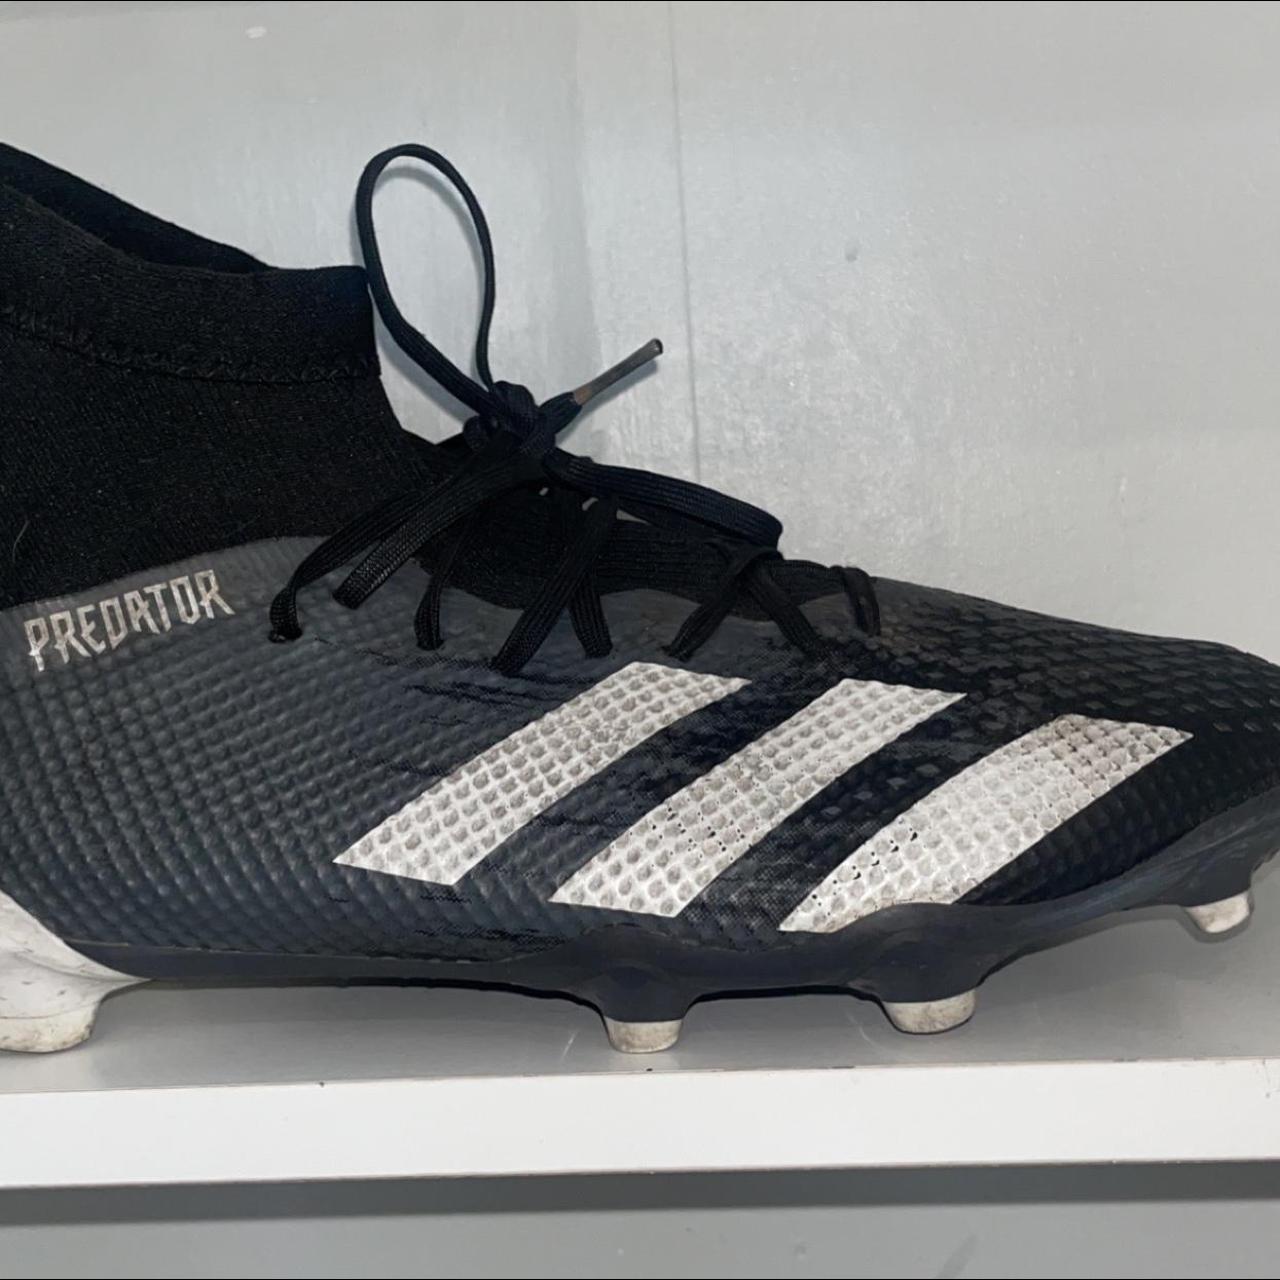 Adidas predator football boots Will be cleaned... - Depop